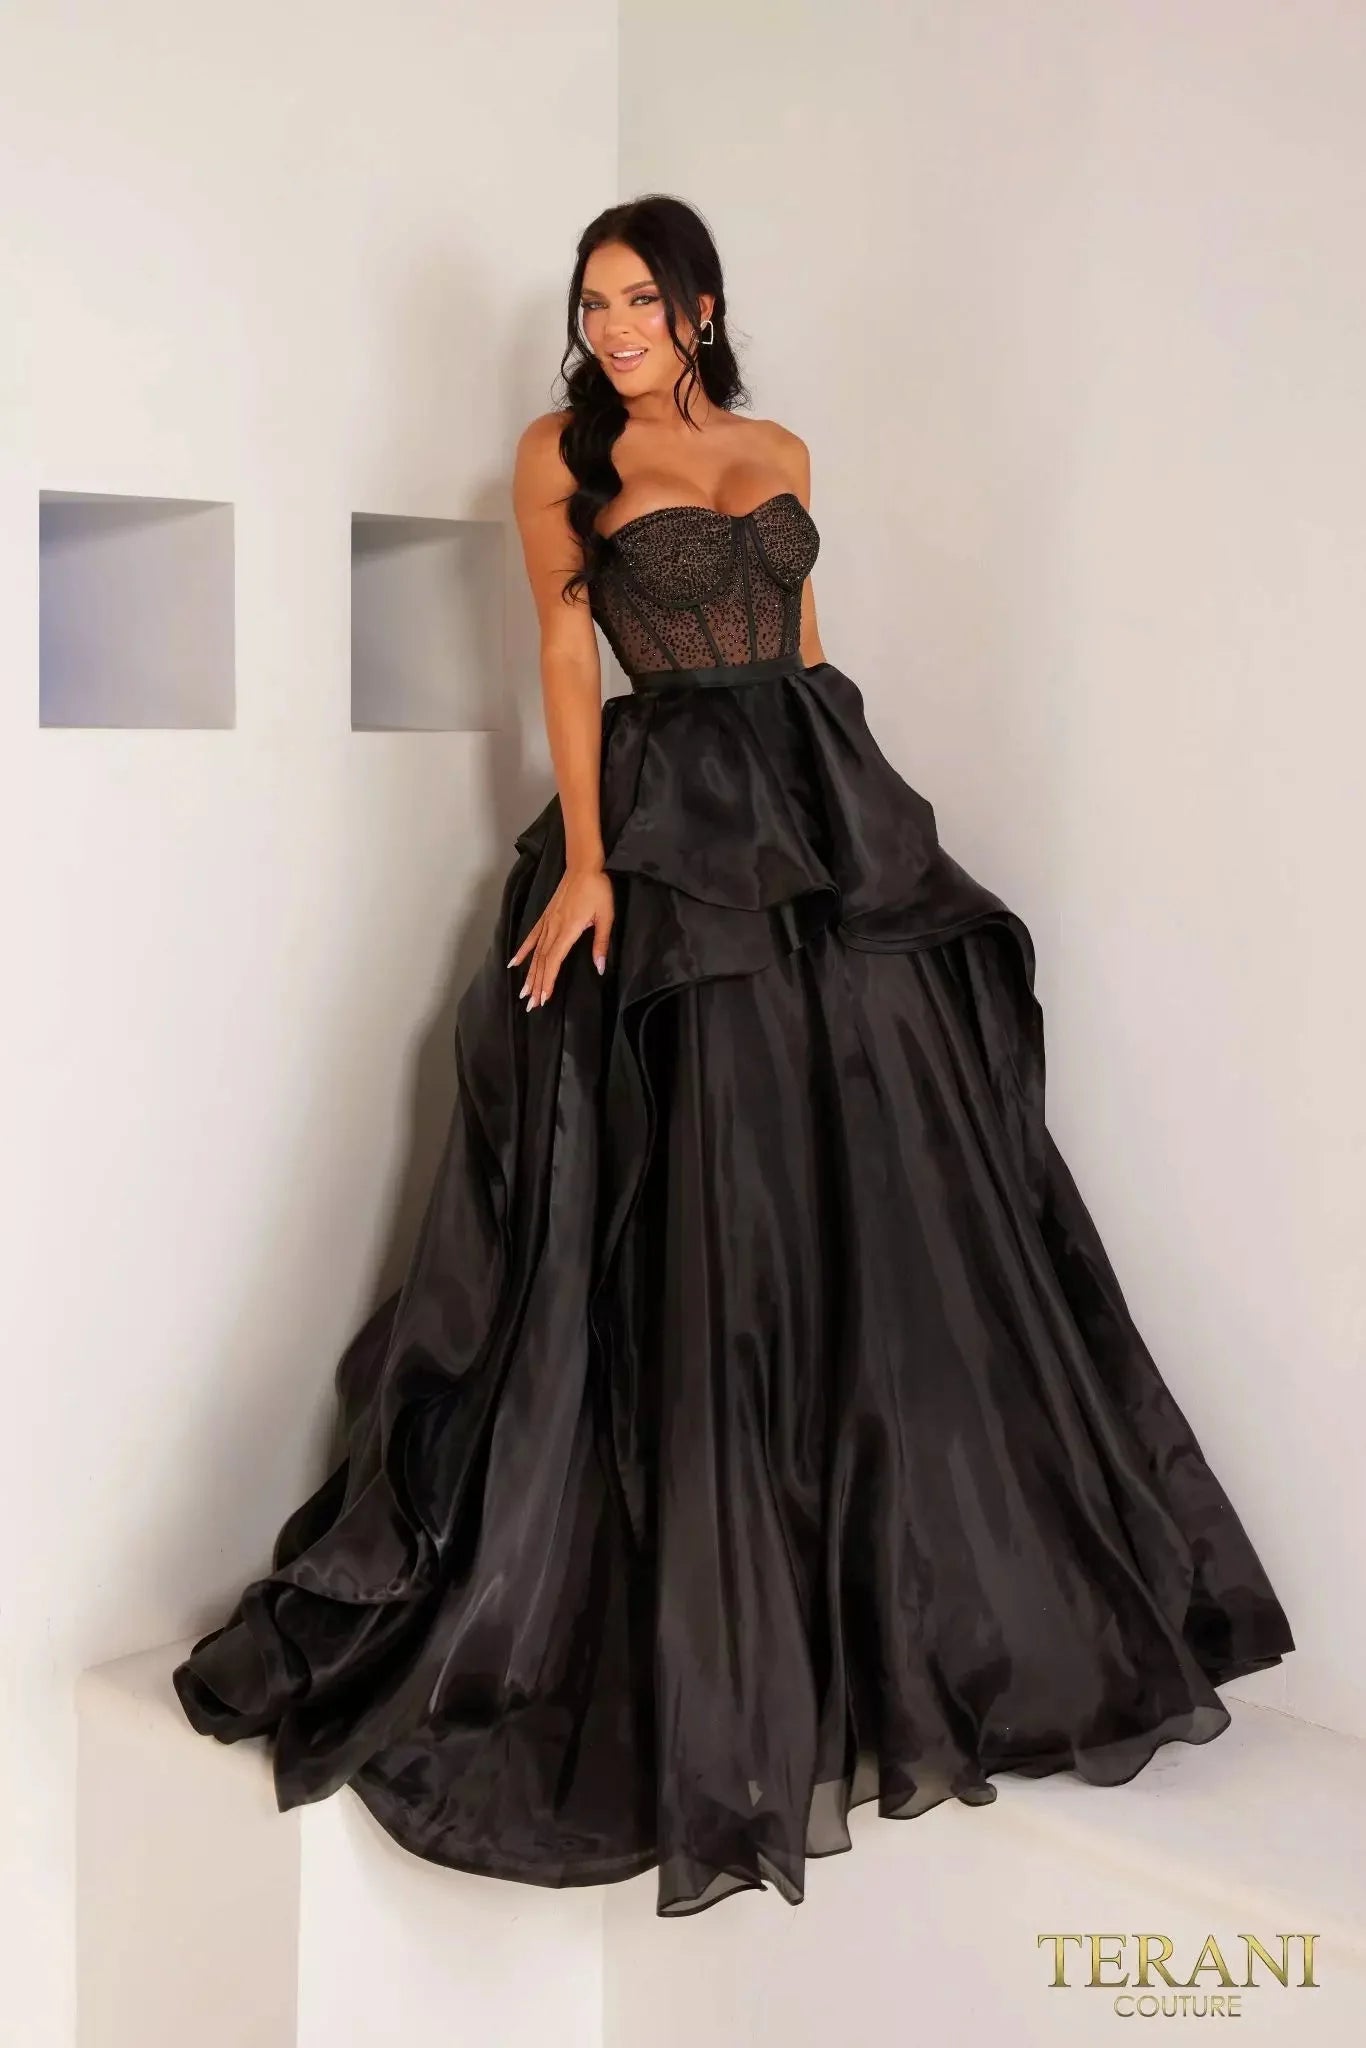 Terani Couture 241P2209 - Embellished Heat Set Stone Strapless Ballgown Special Occasion Dress